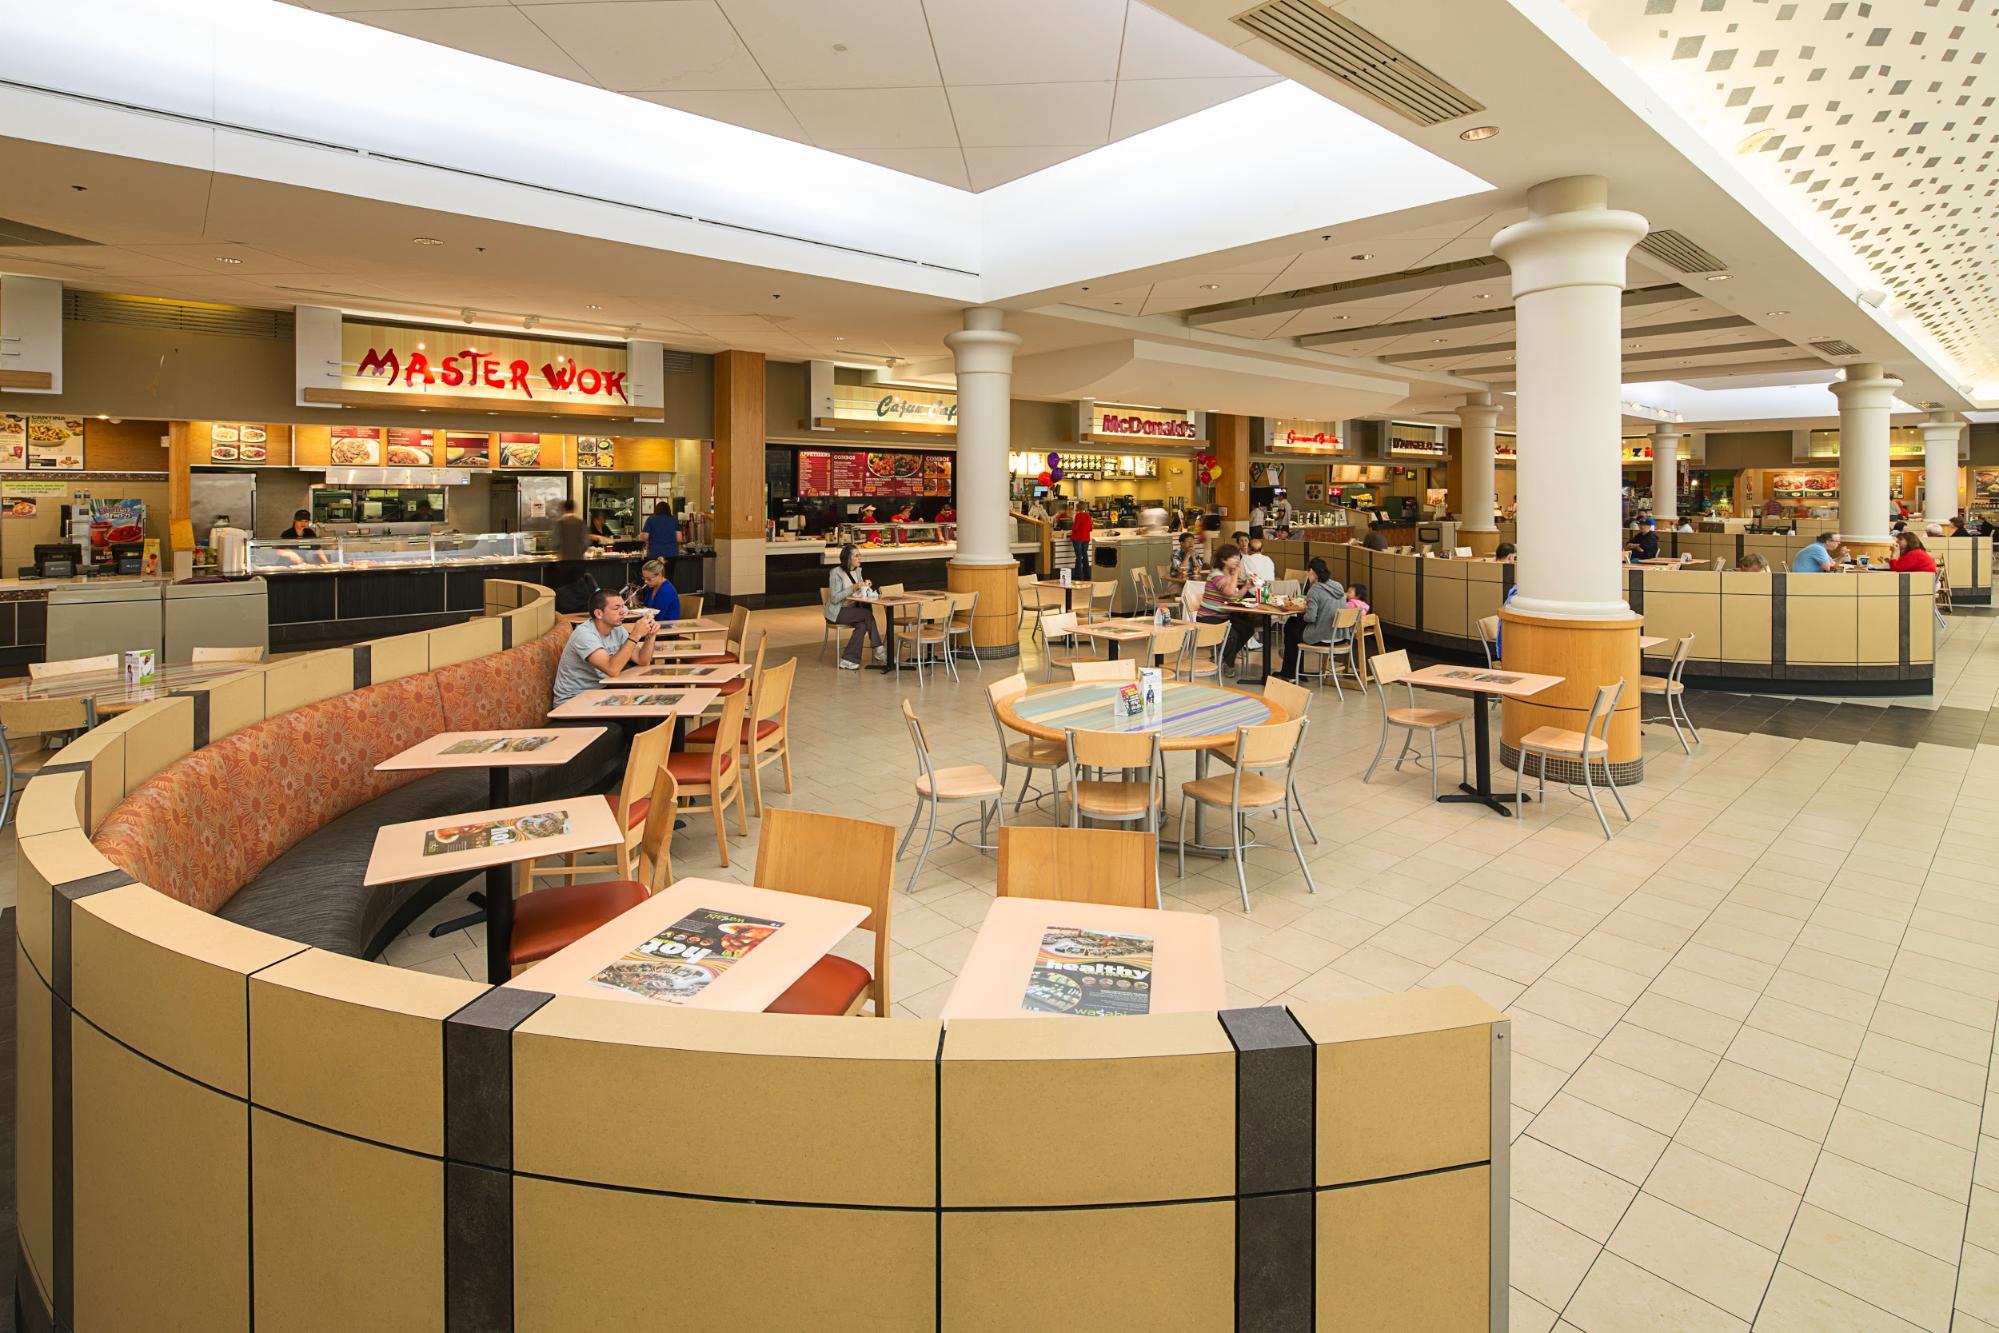 Natick Mall Food Court, courtesy of the Massachusetts Office of Transportation.